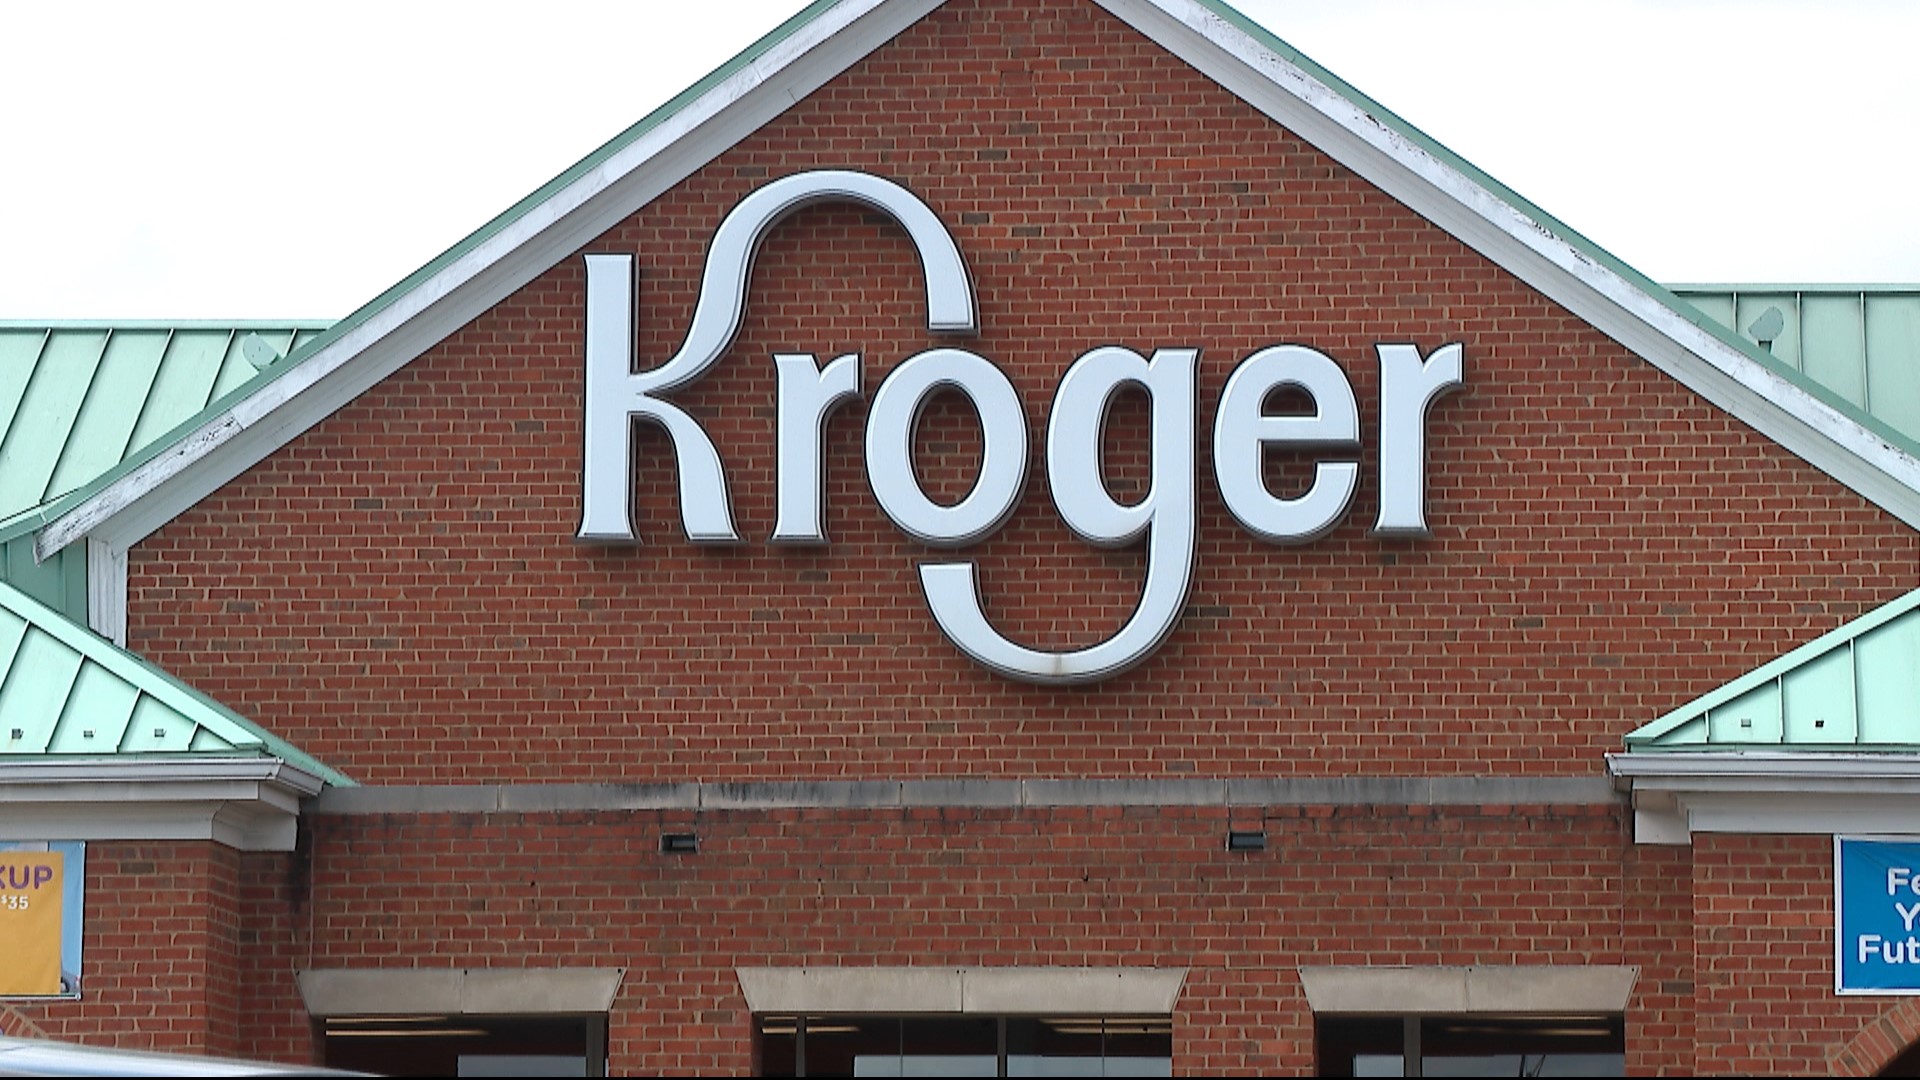 The safety measure has already been deployed and impacts six Kroger locations in the city.